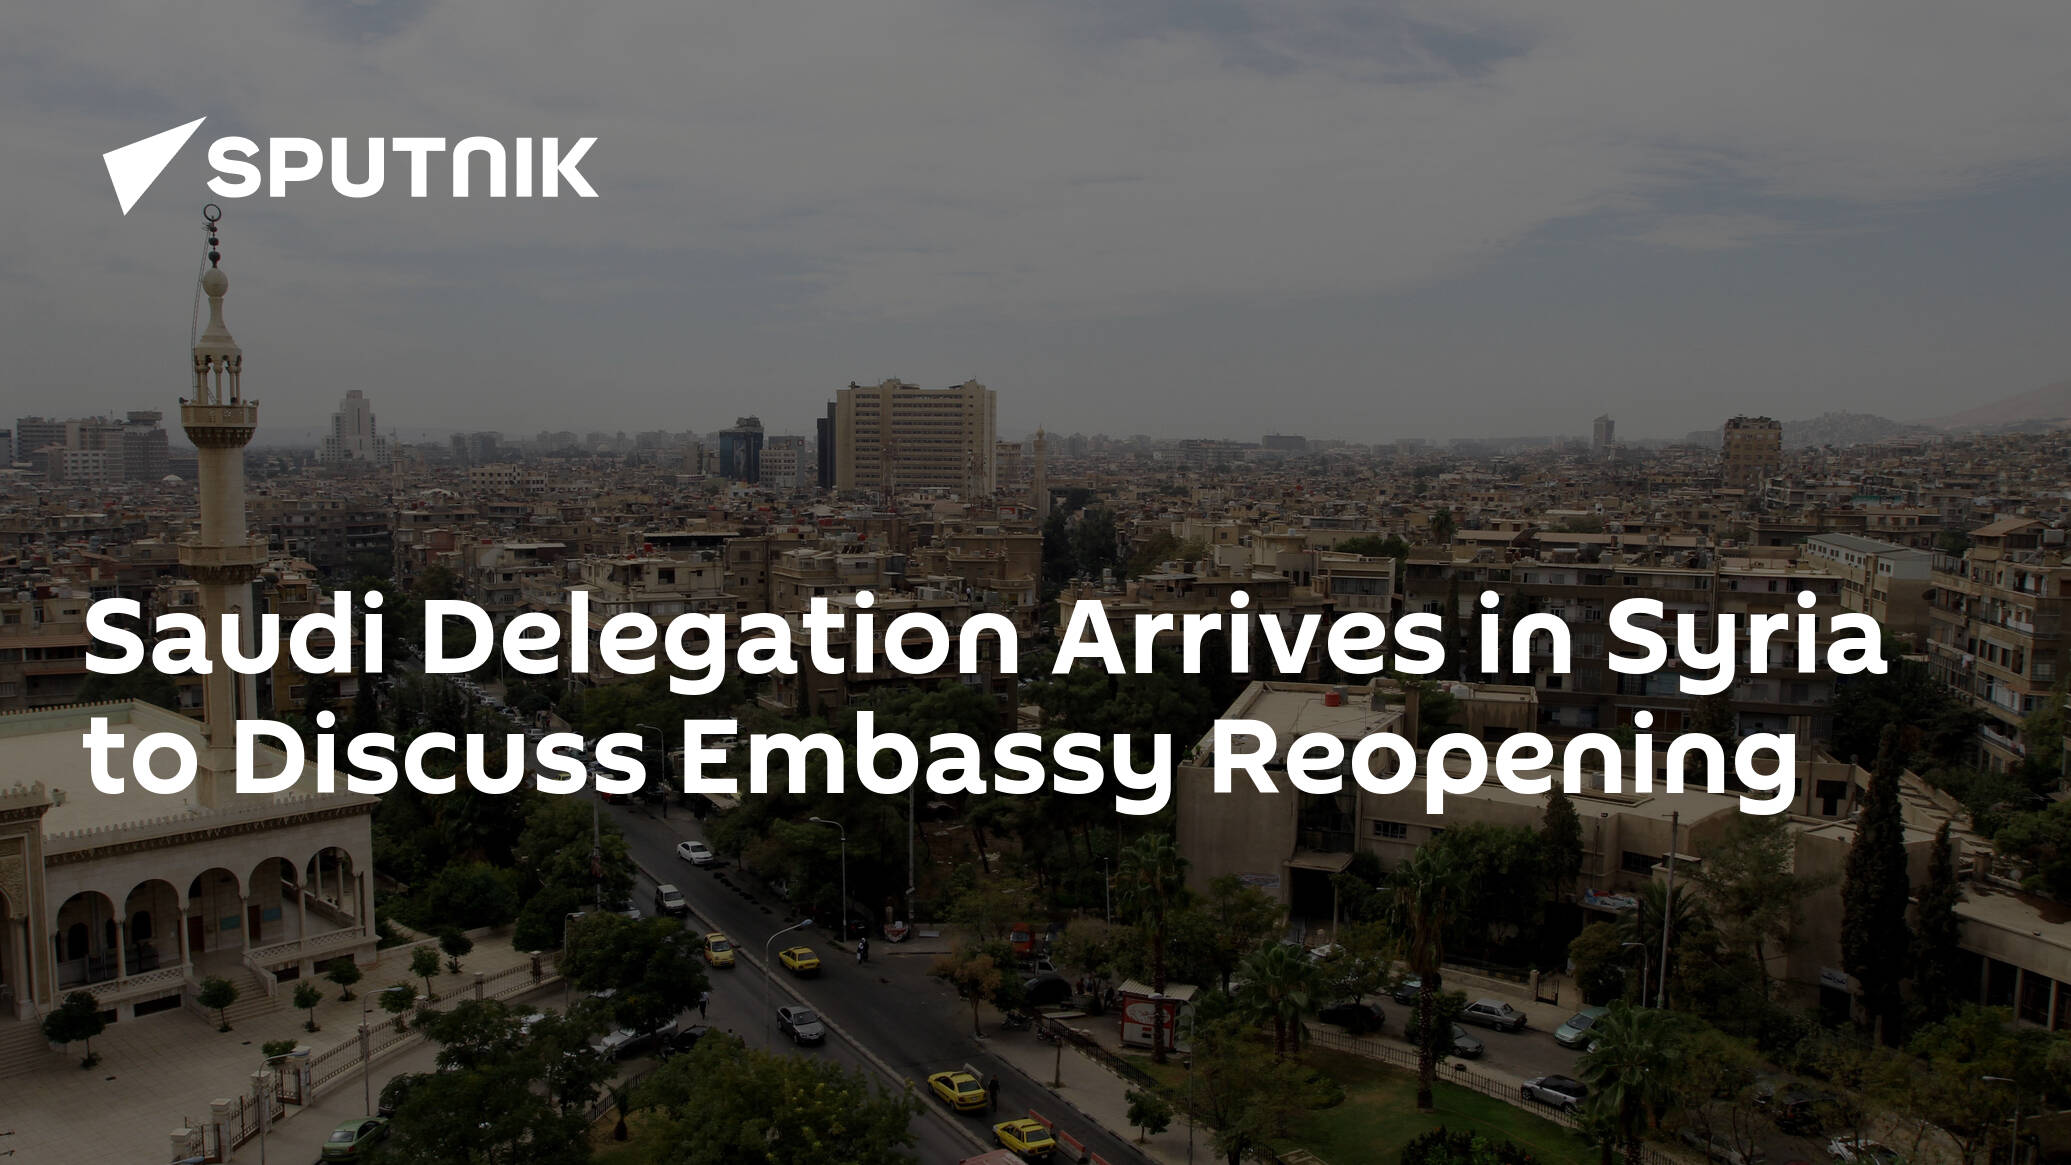 Saudi Delegation Arrives in Syria to Discuss Embassy Reopening